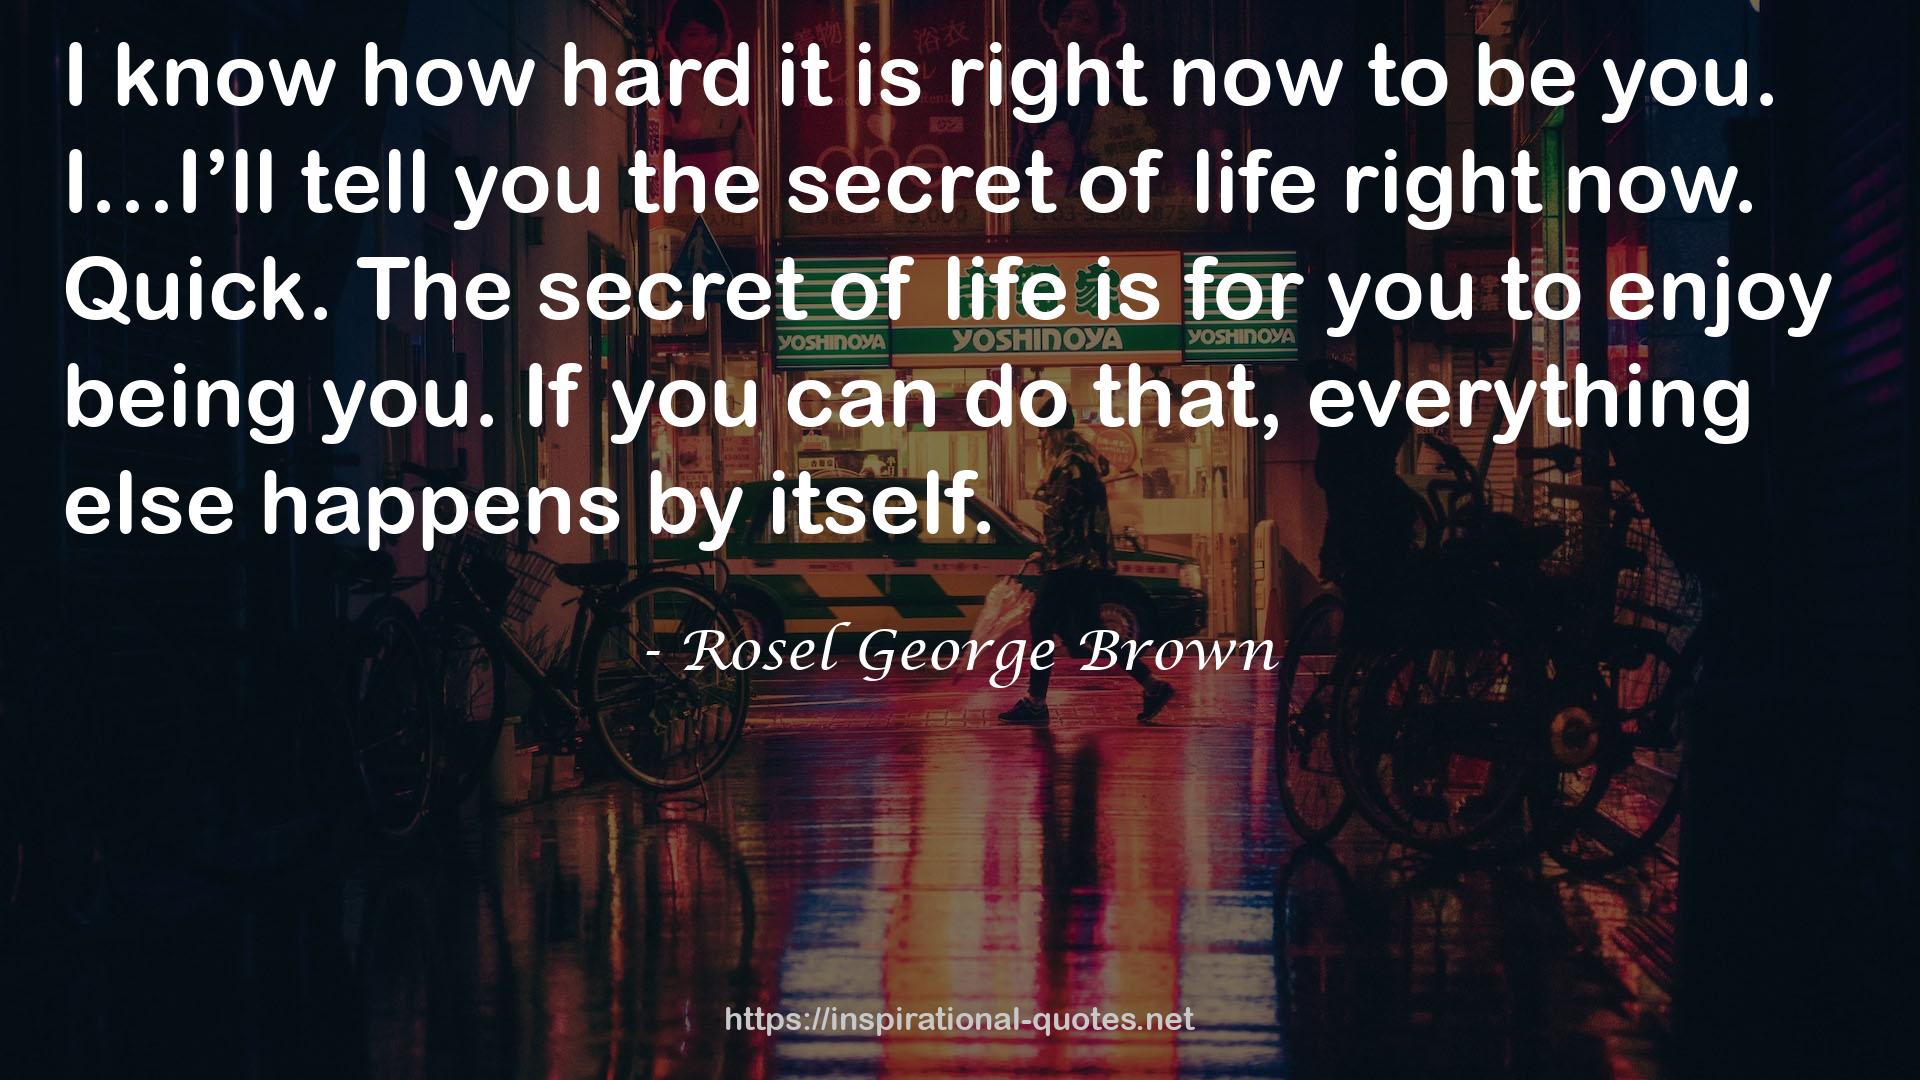 Rosel George Brown QUOTES